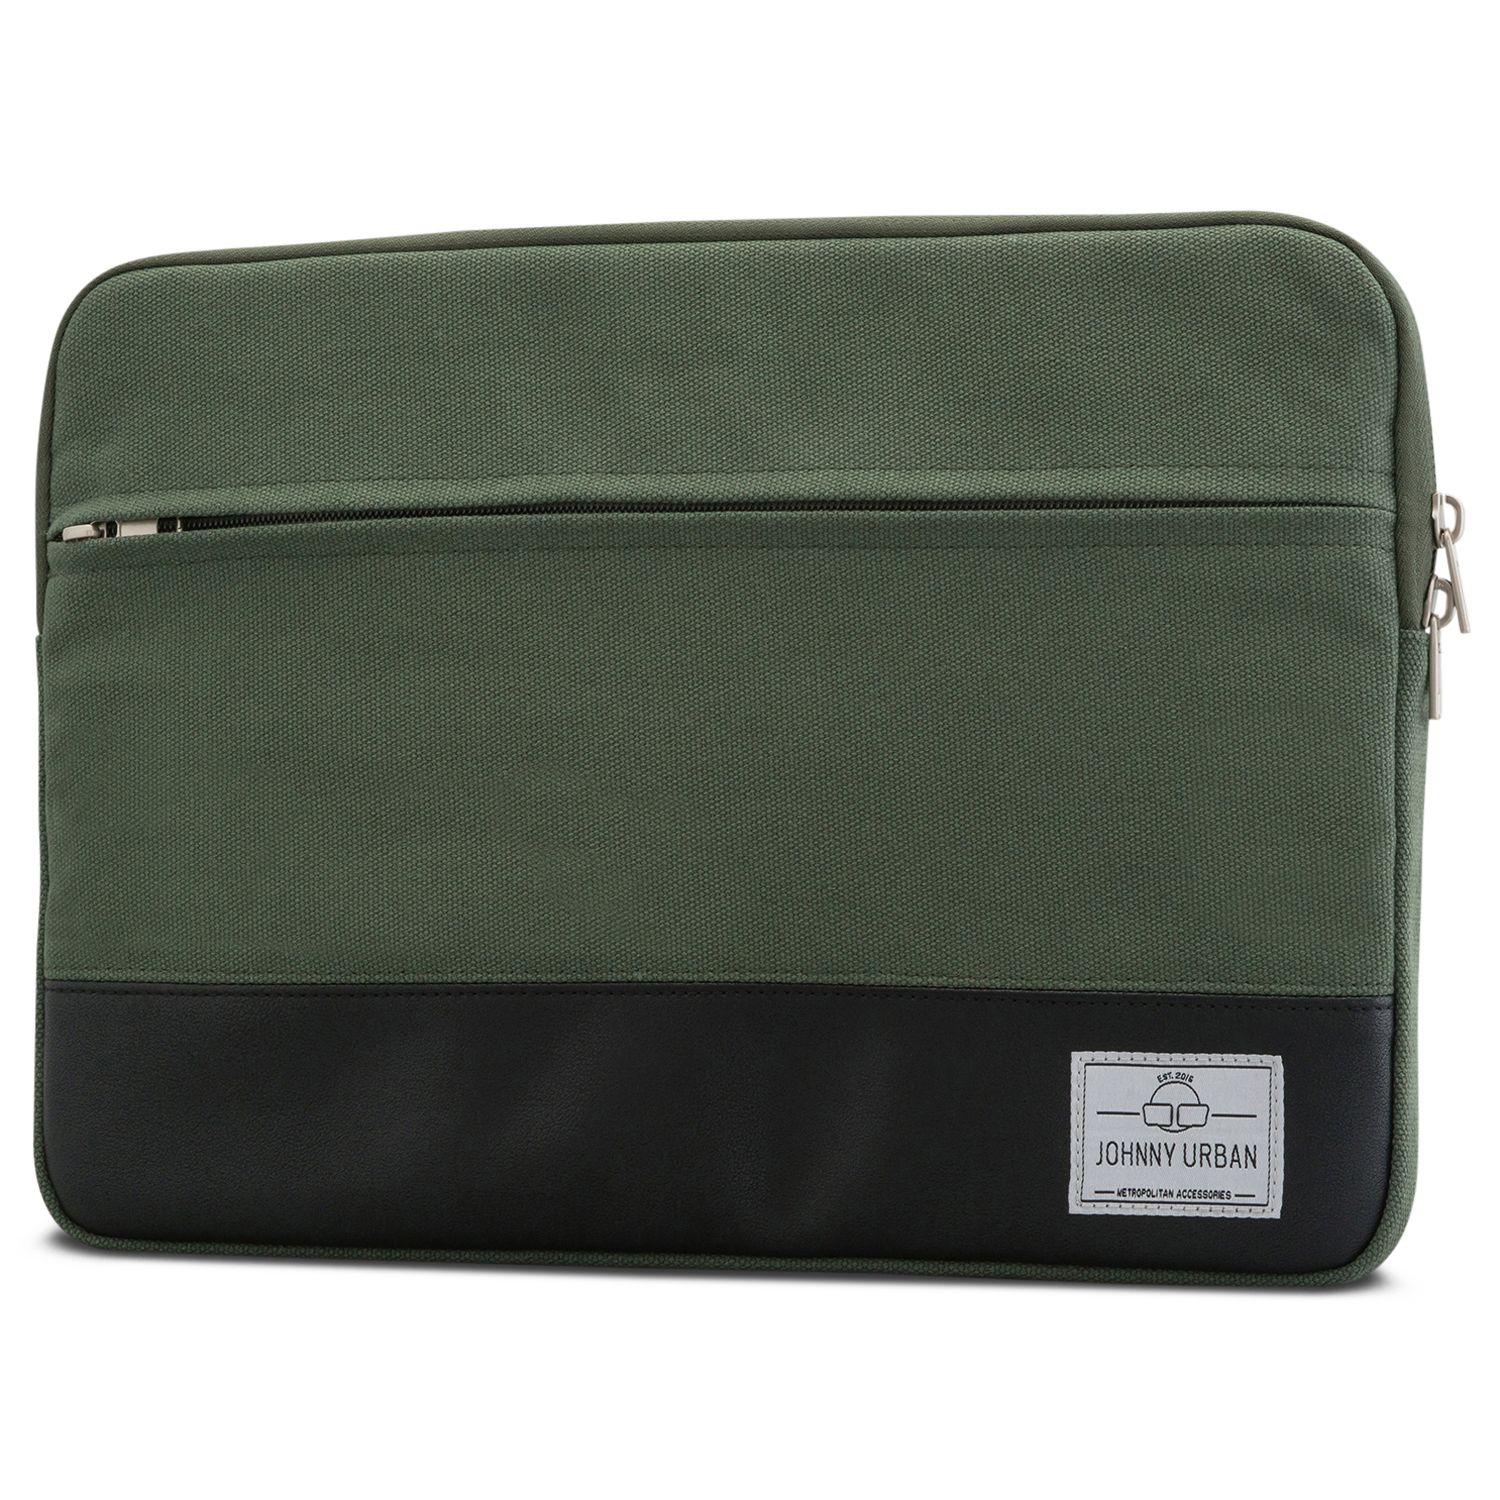 Johnny Urban 13 inch Green and Black Cotton Canvas Laptop Sleeve